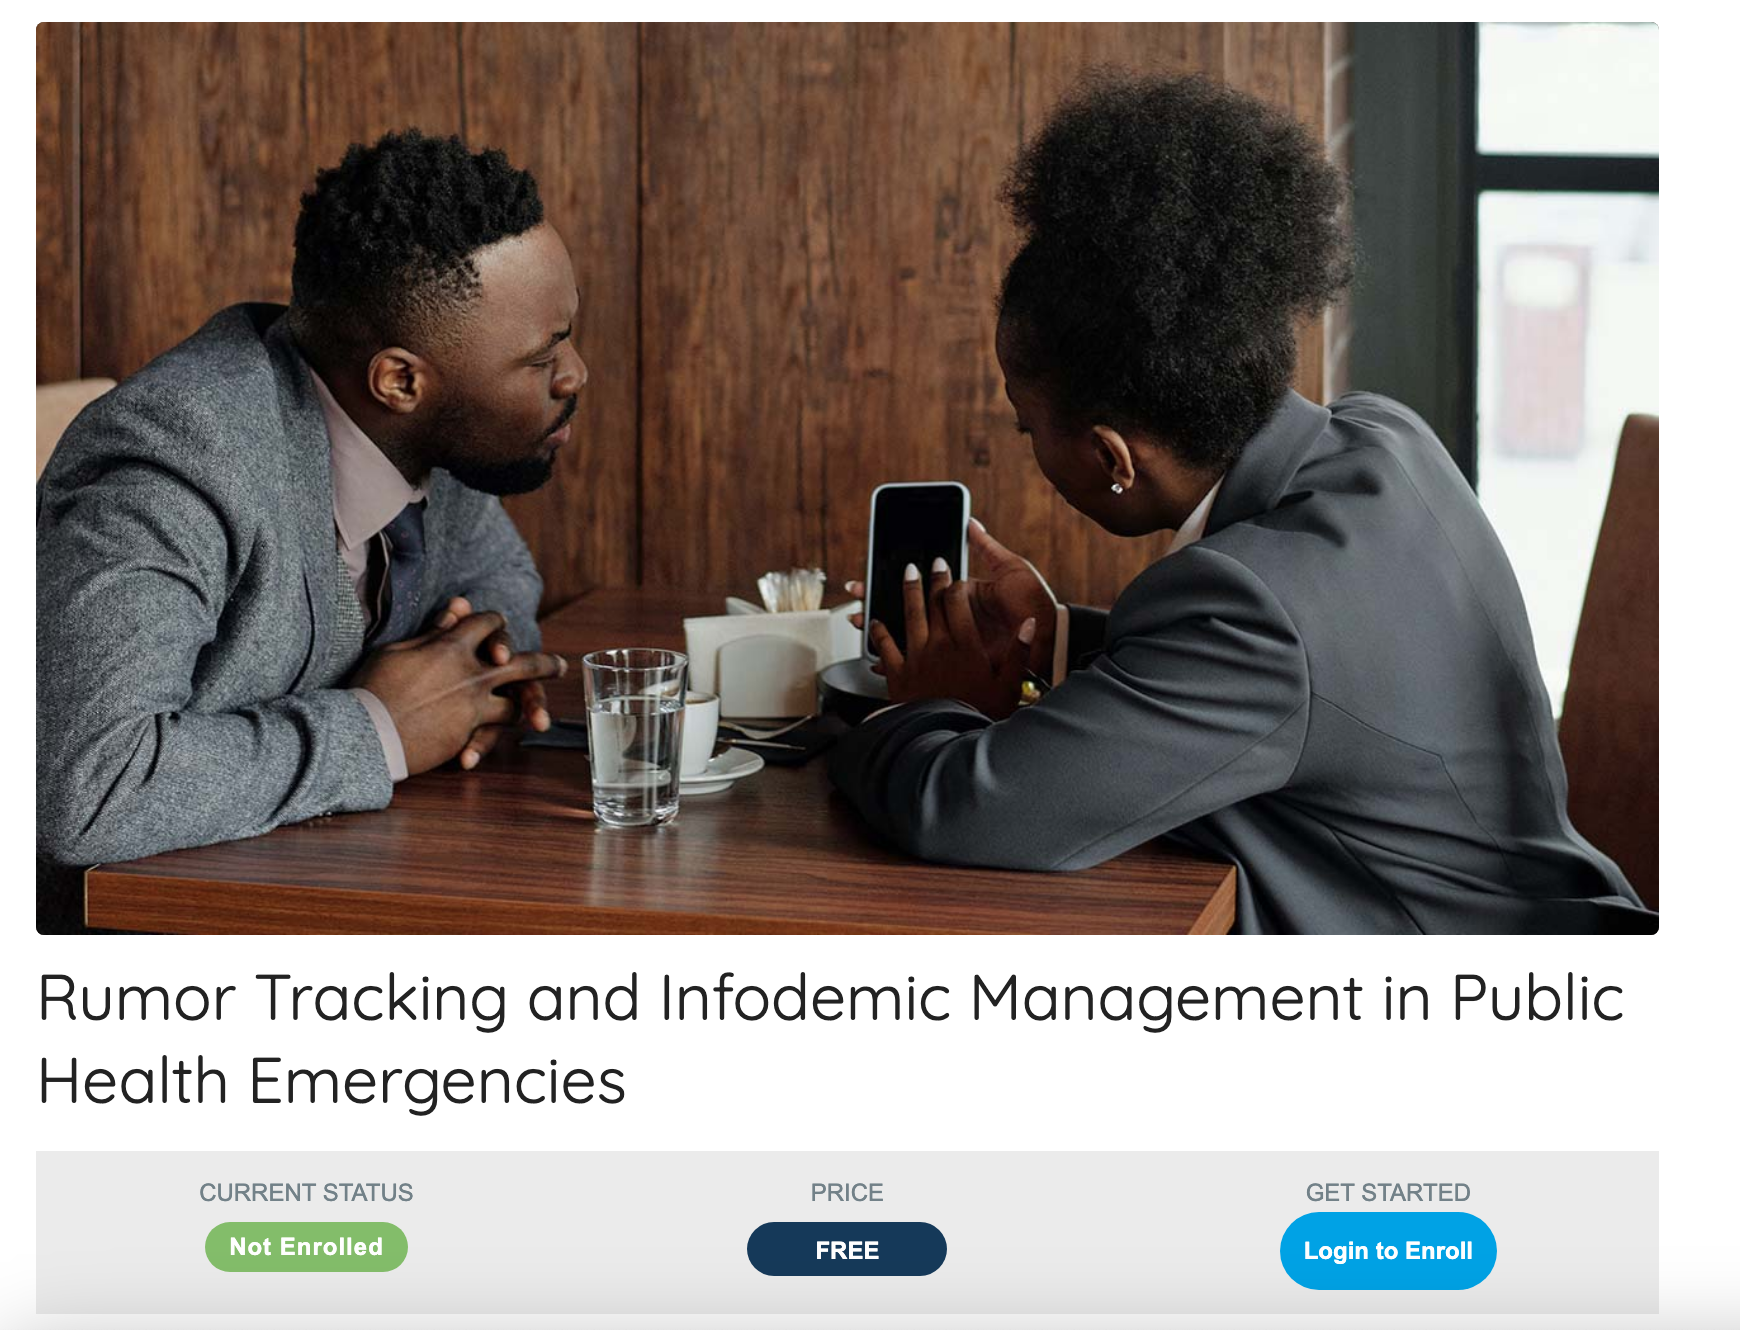 Rumor Tracking and Infodemic Management in Public Health Emergencies